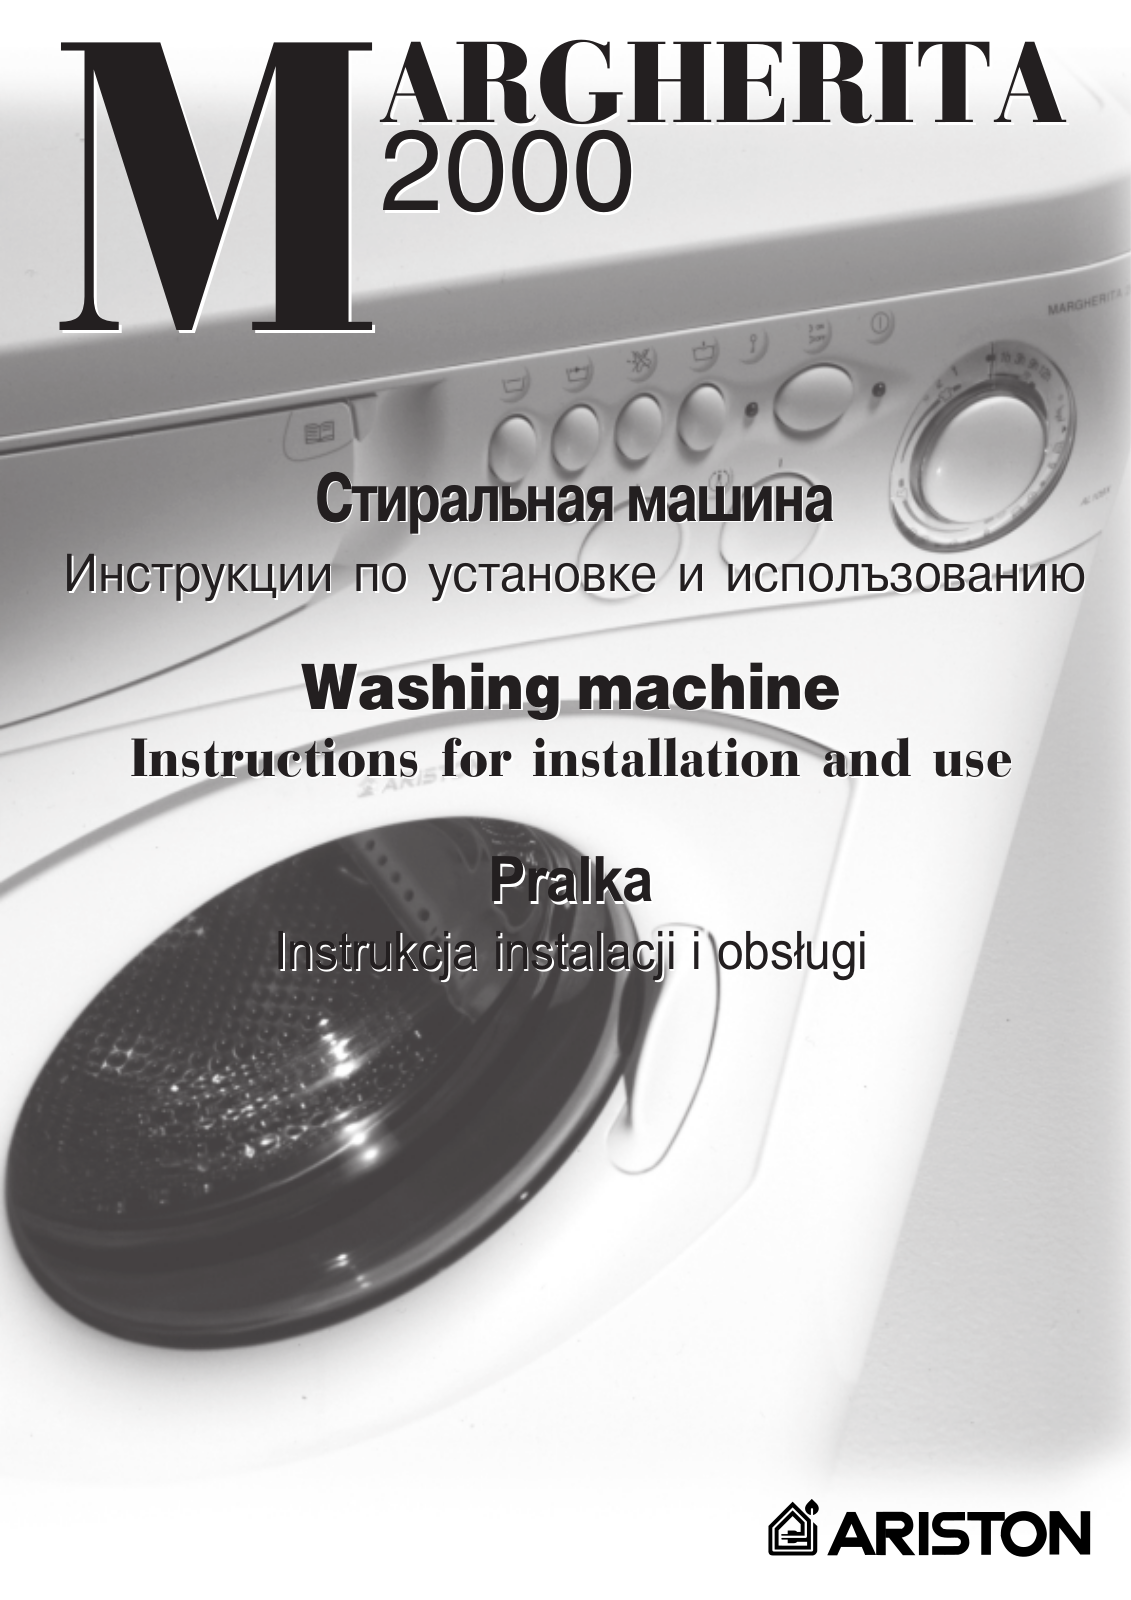 Ariston Margherita 2000 Instructions for Installation and Use